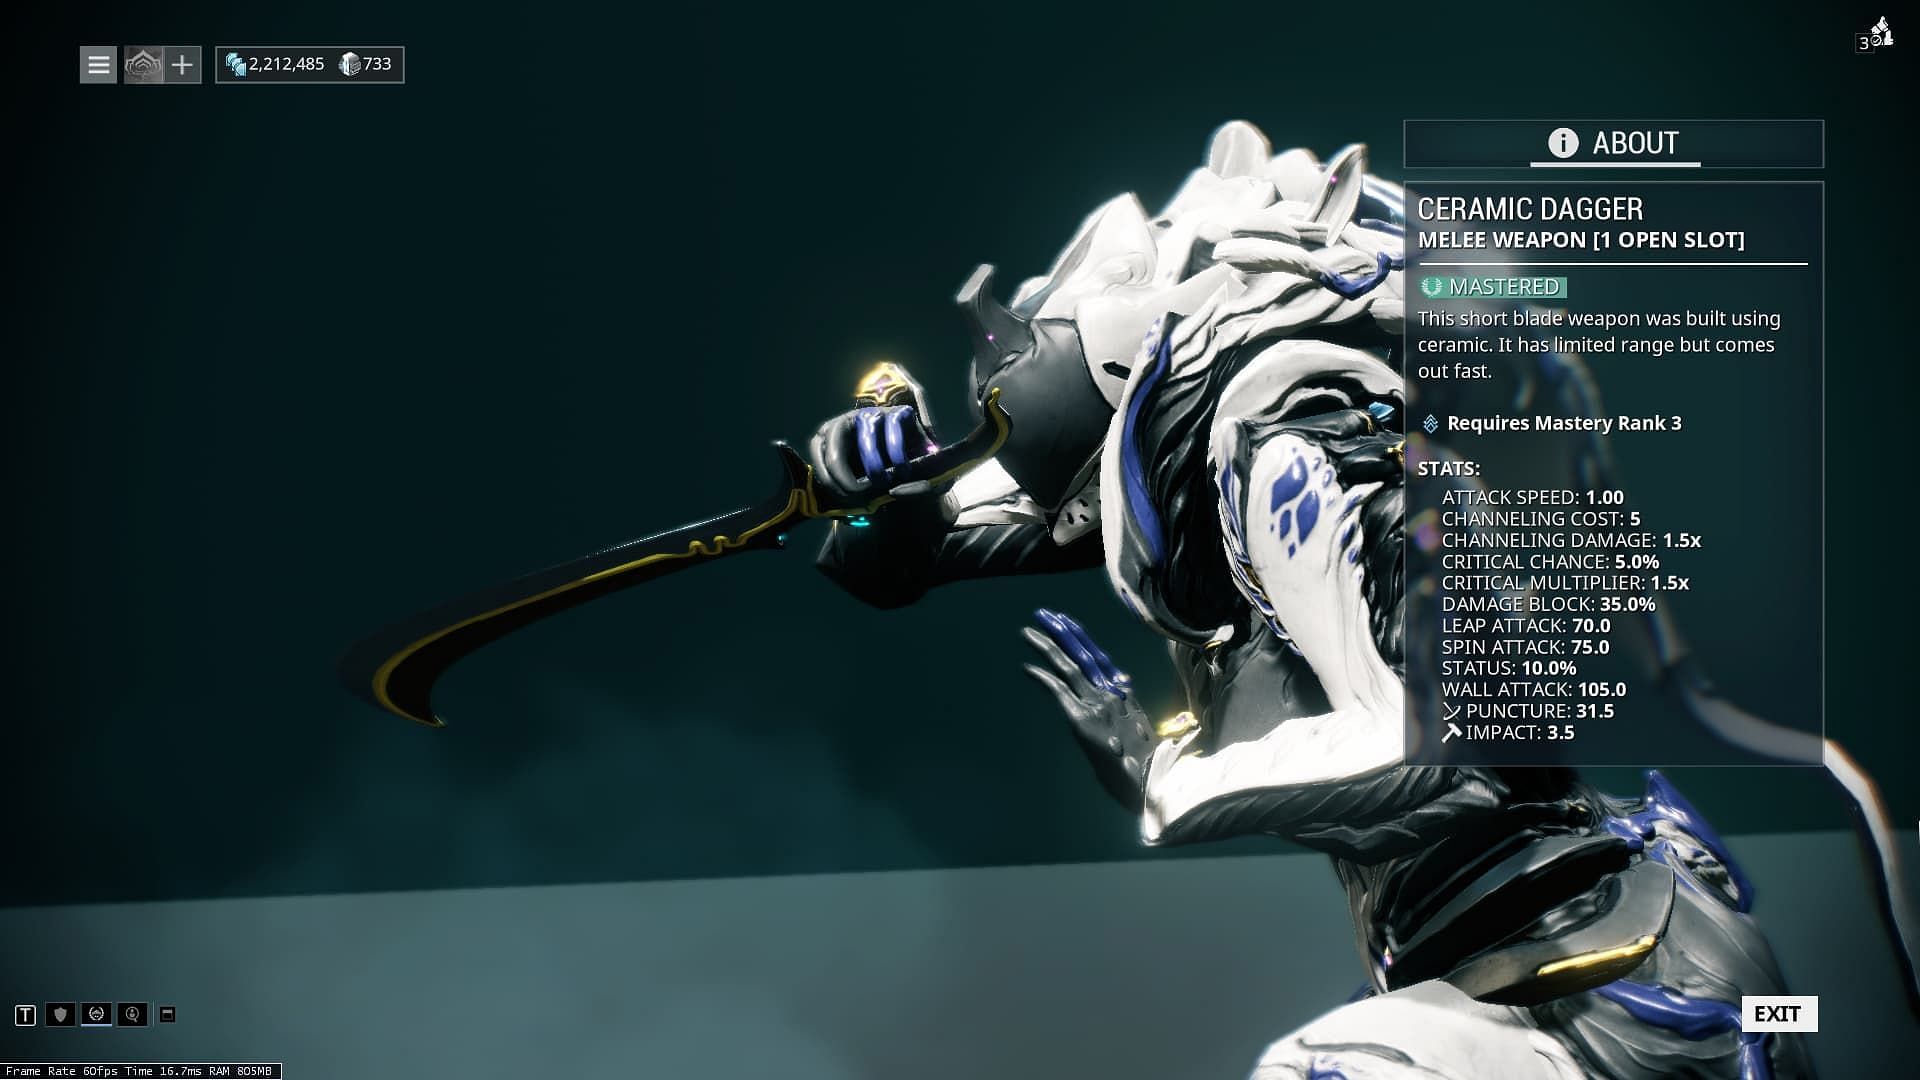 Saryn equipped with a Ceramic dagger, holding it in a reverse grip